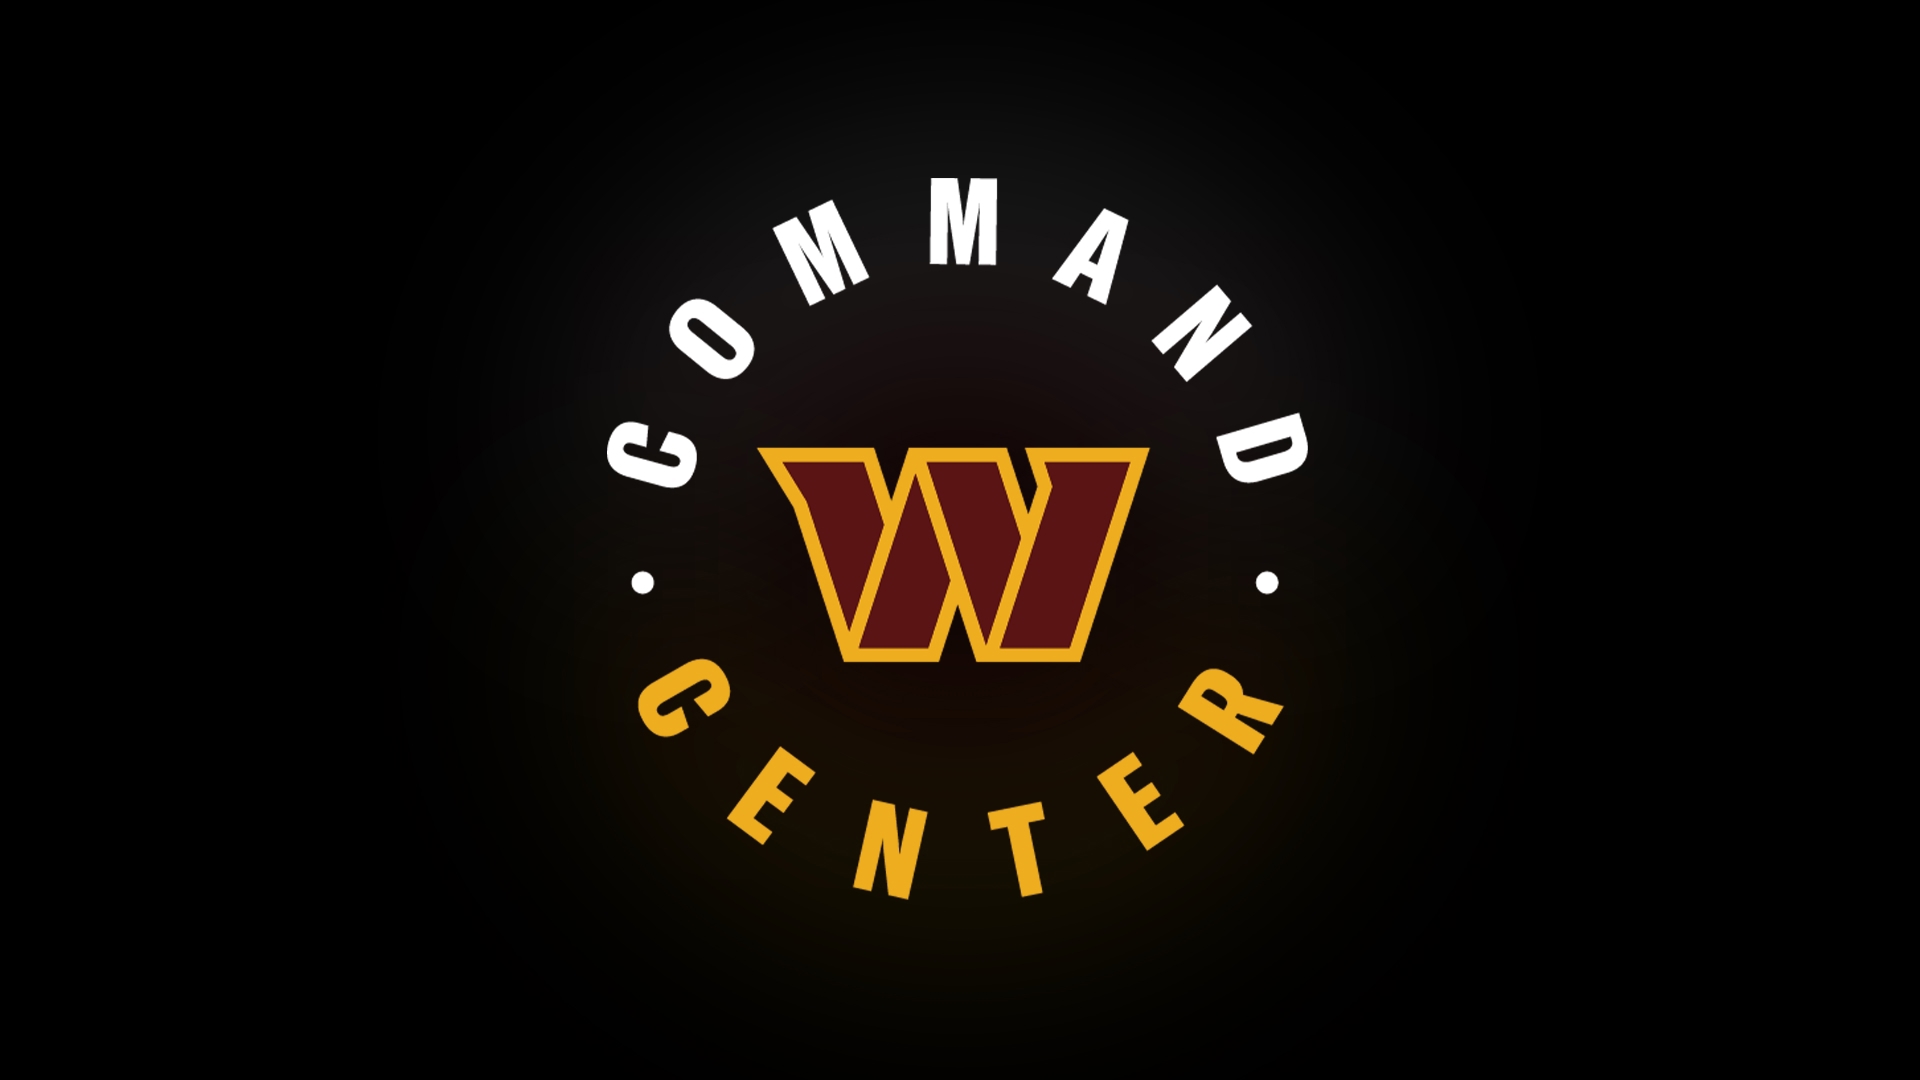 Command Center is the flagship weekly show hosted by Bryan Colbert Jr. and Washington Commanders' legends Santana Moss.